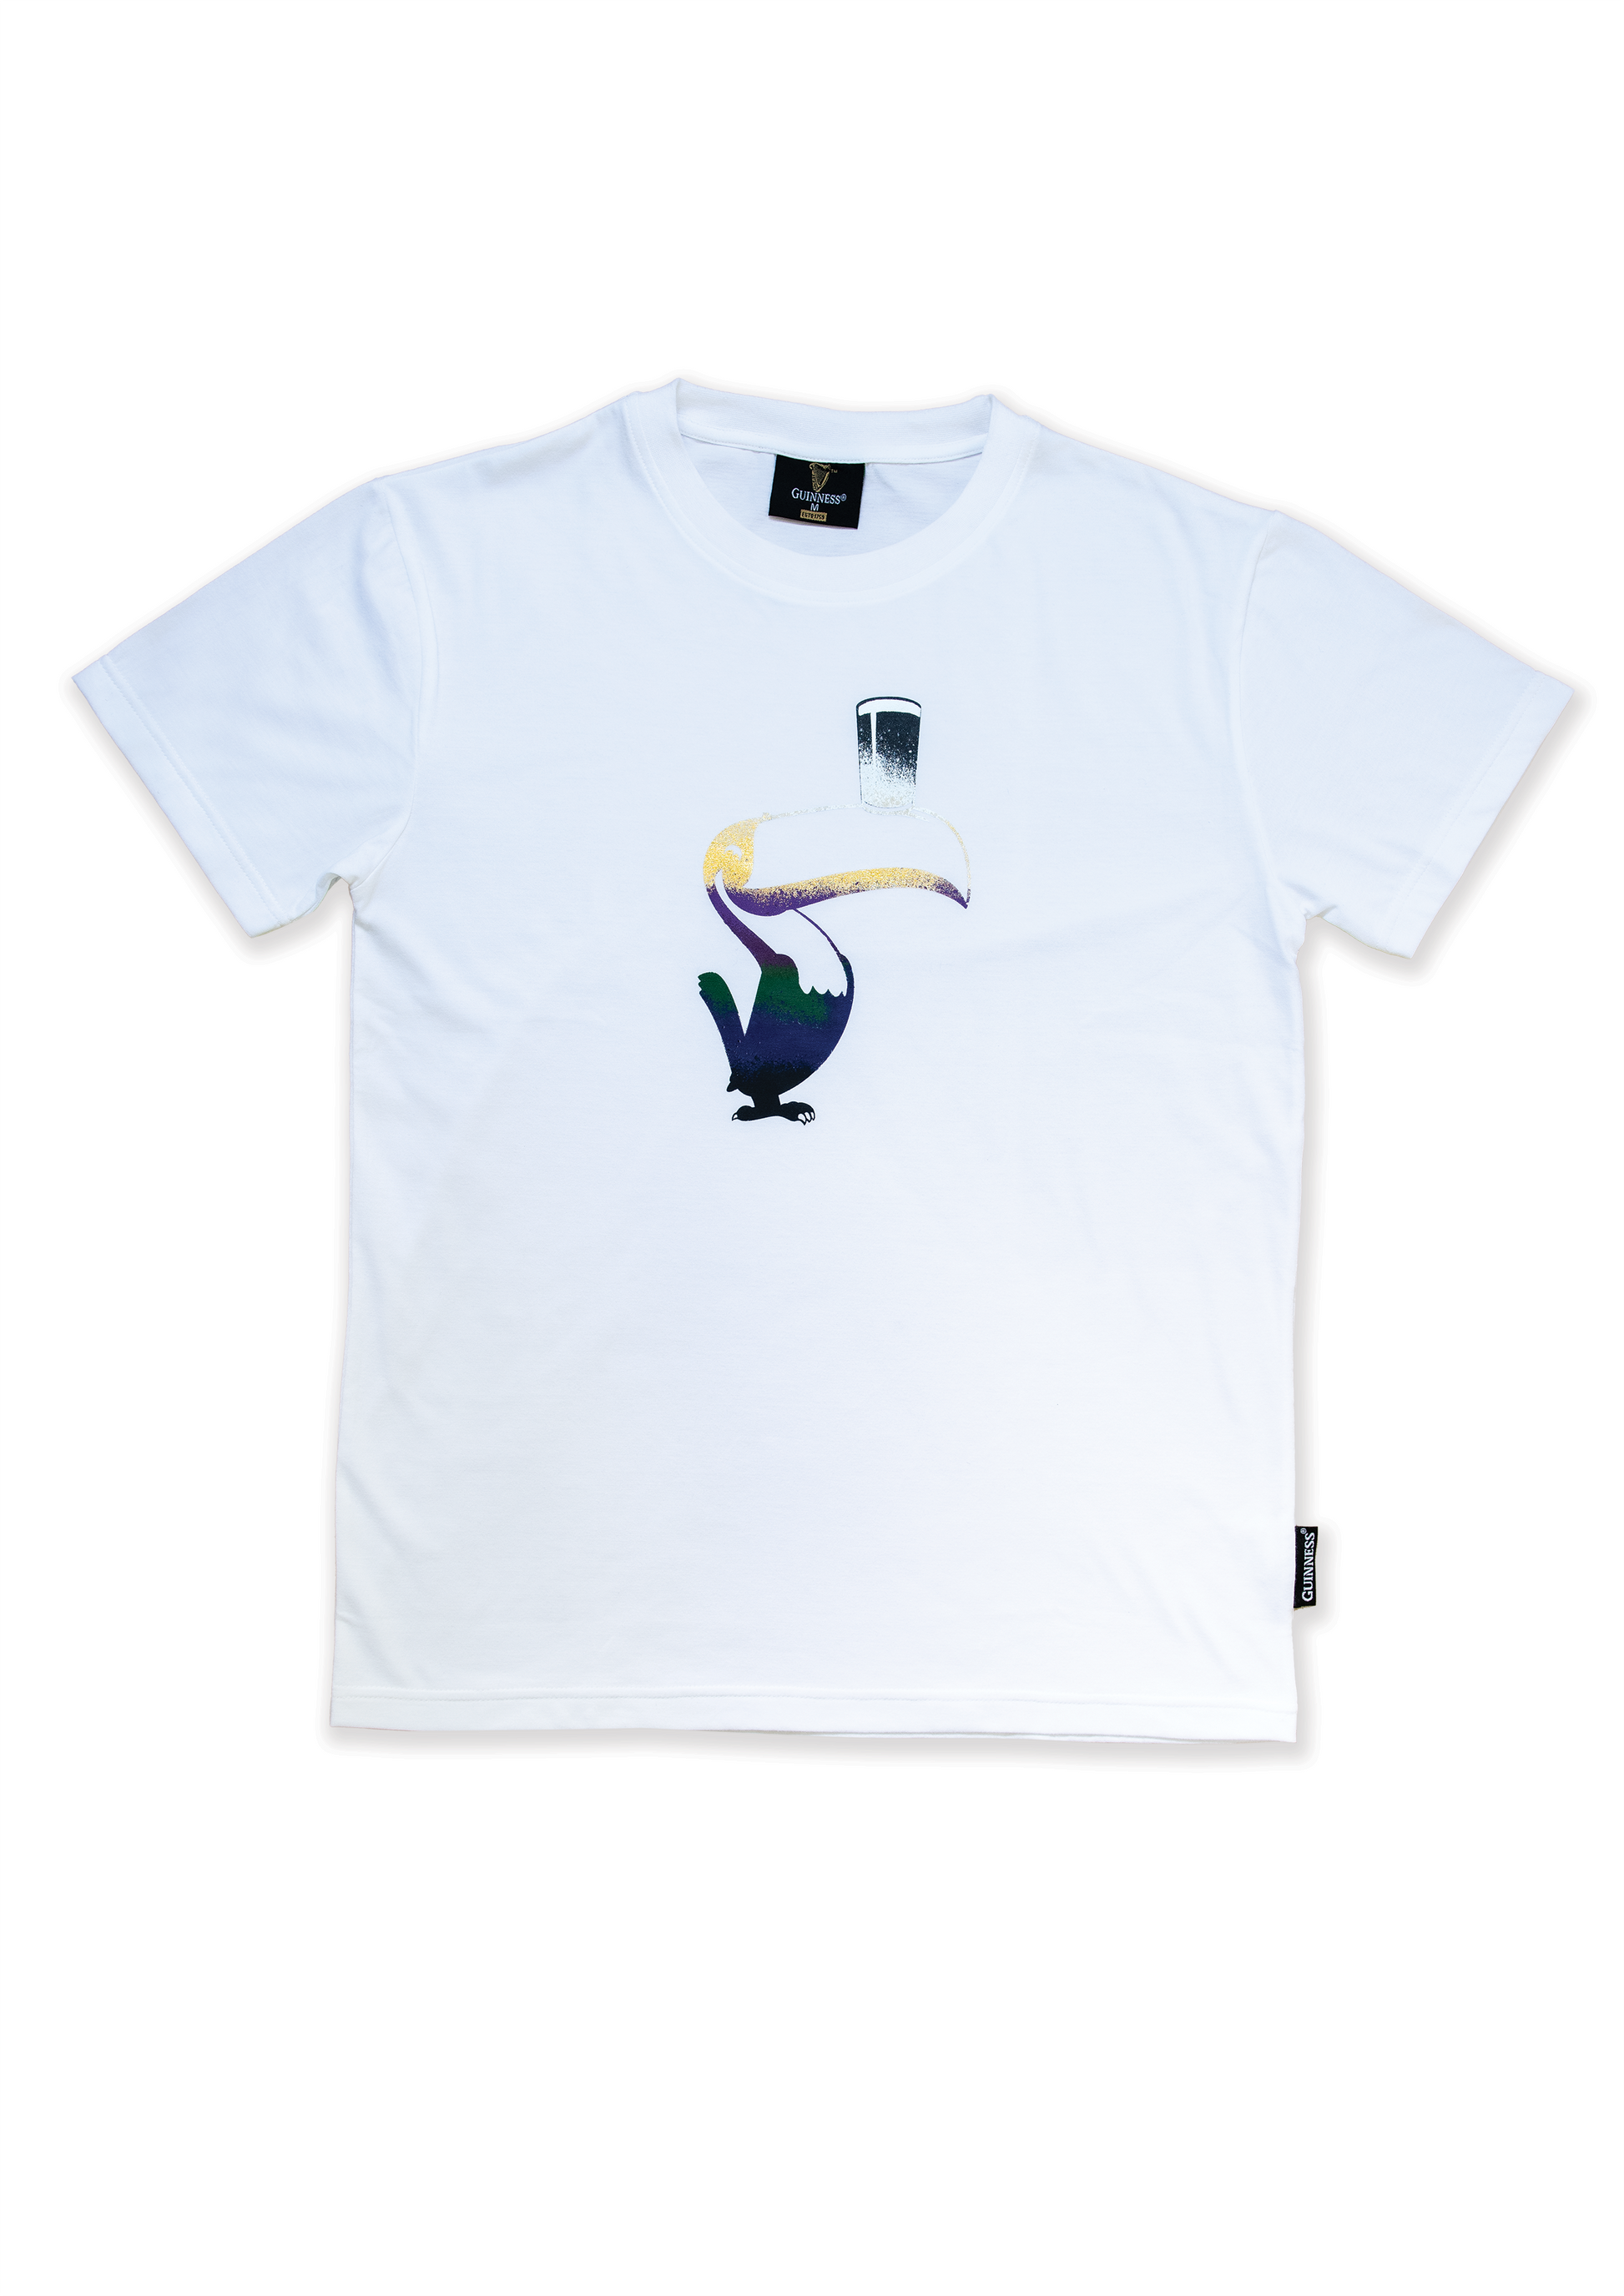 A Guinness Liquid Toucan T-Shirt - White with an image of a bird on it.